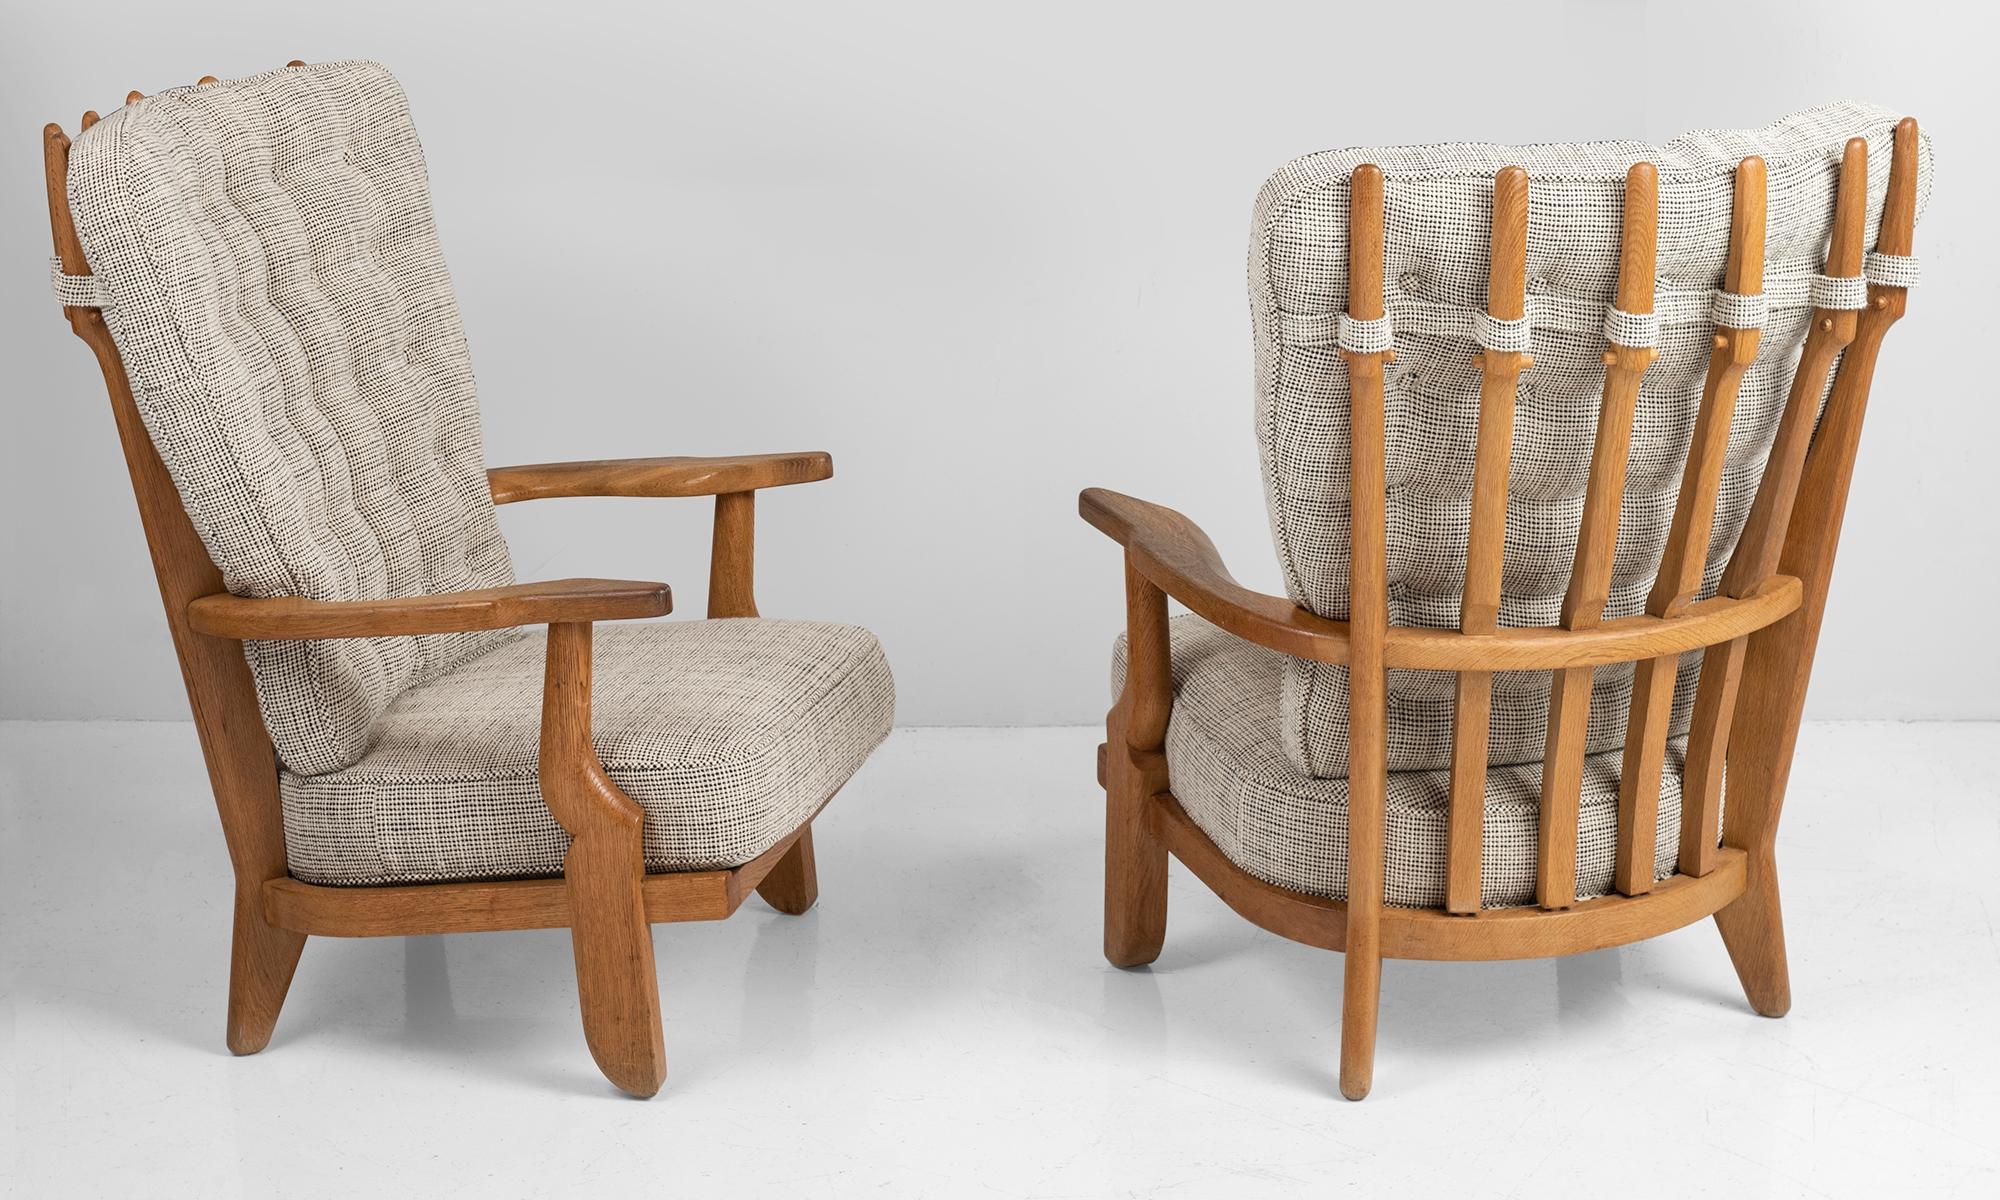 Armchairs by Guillerme et Chambron, France, circa 1950

Carved oak frame with upholstered seat and back.